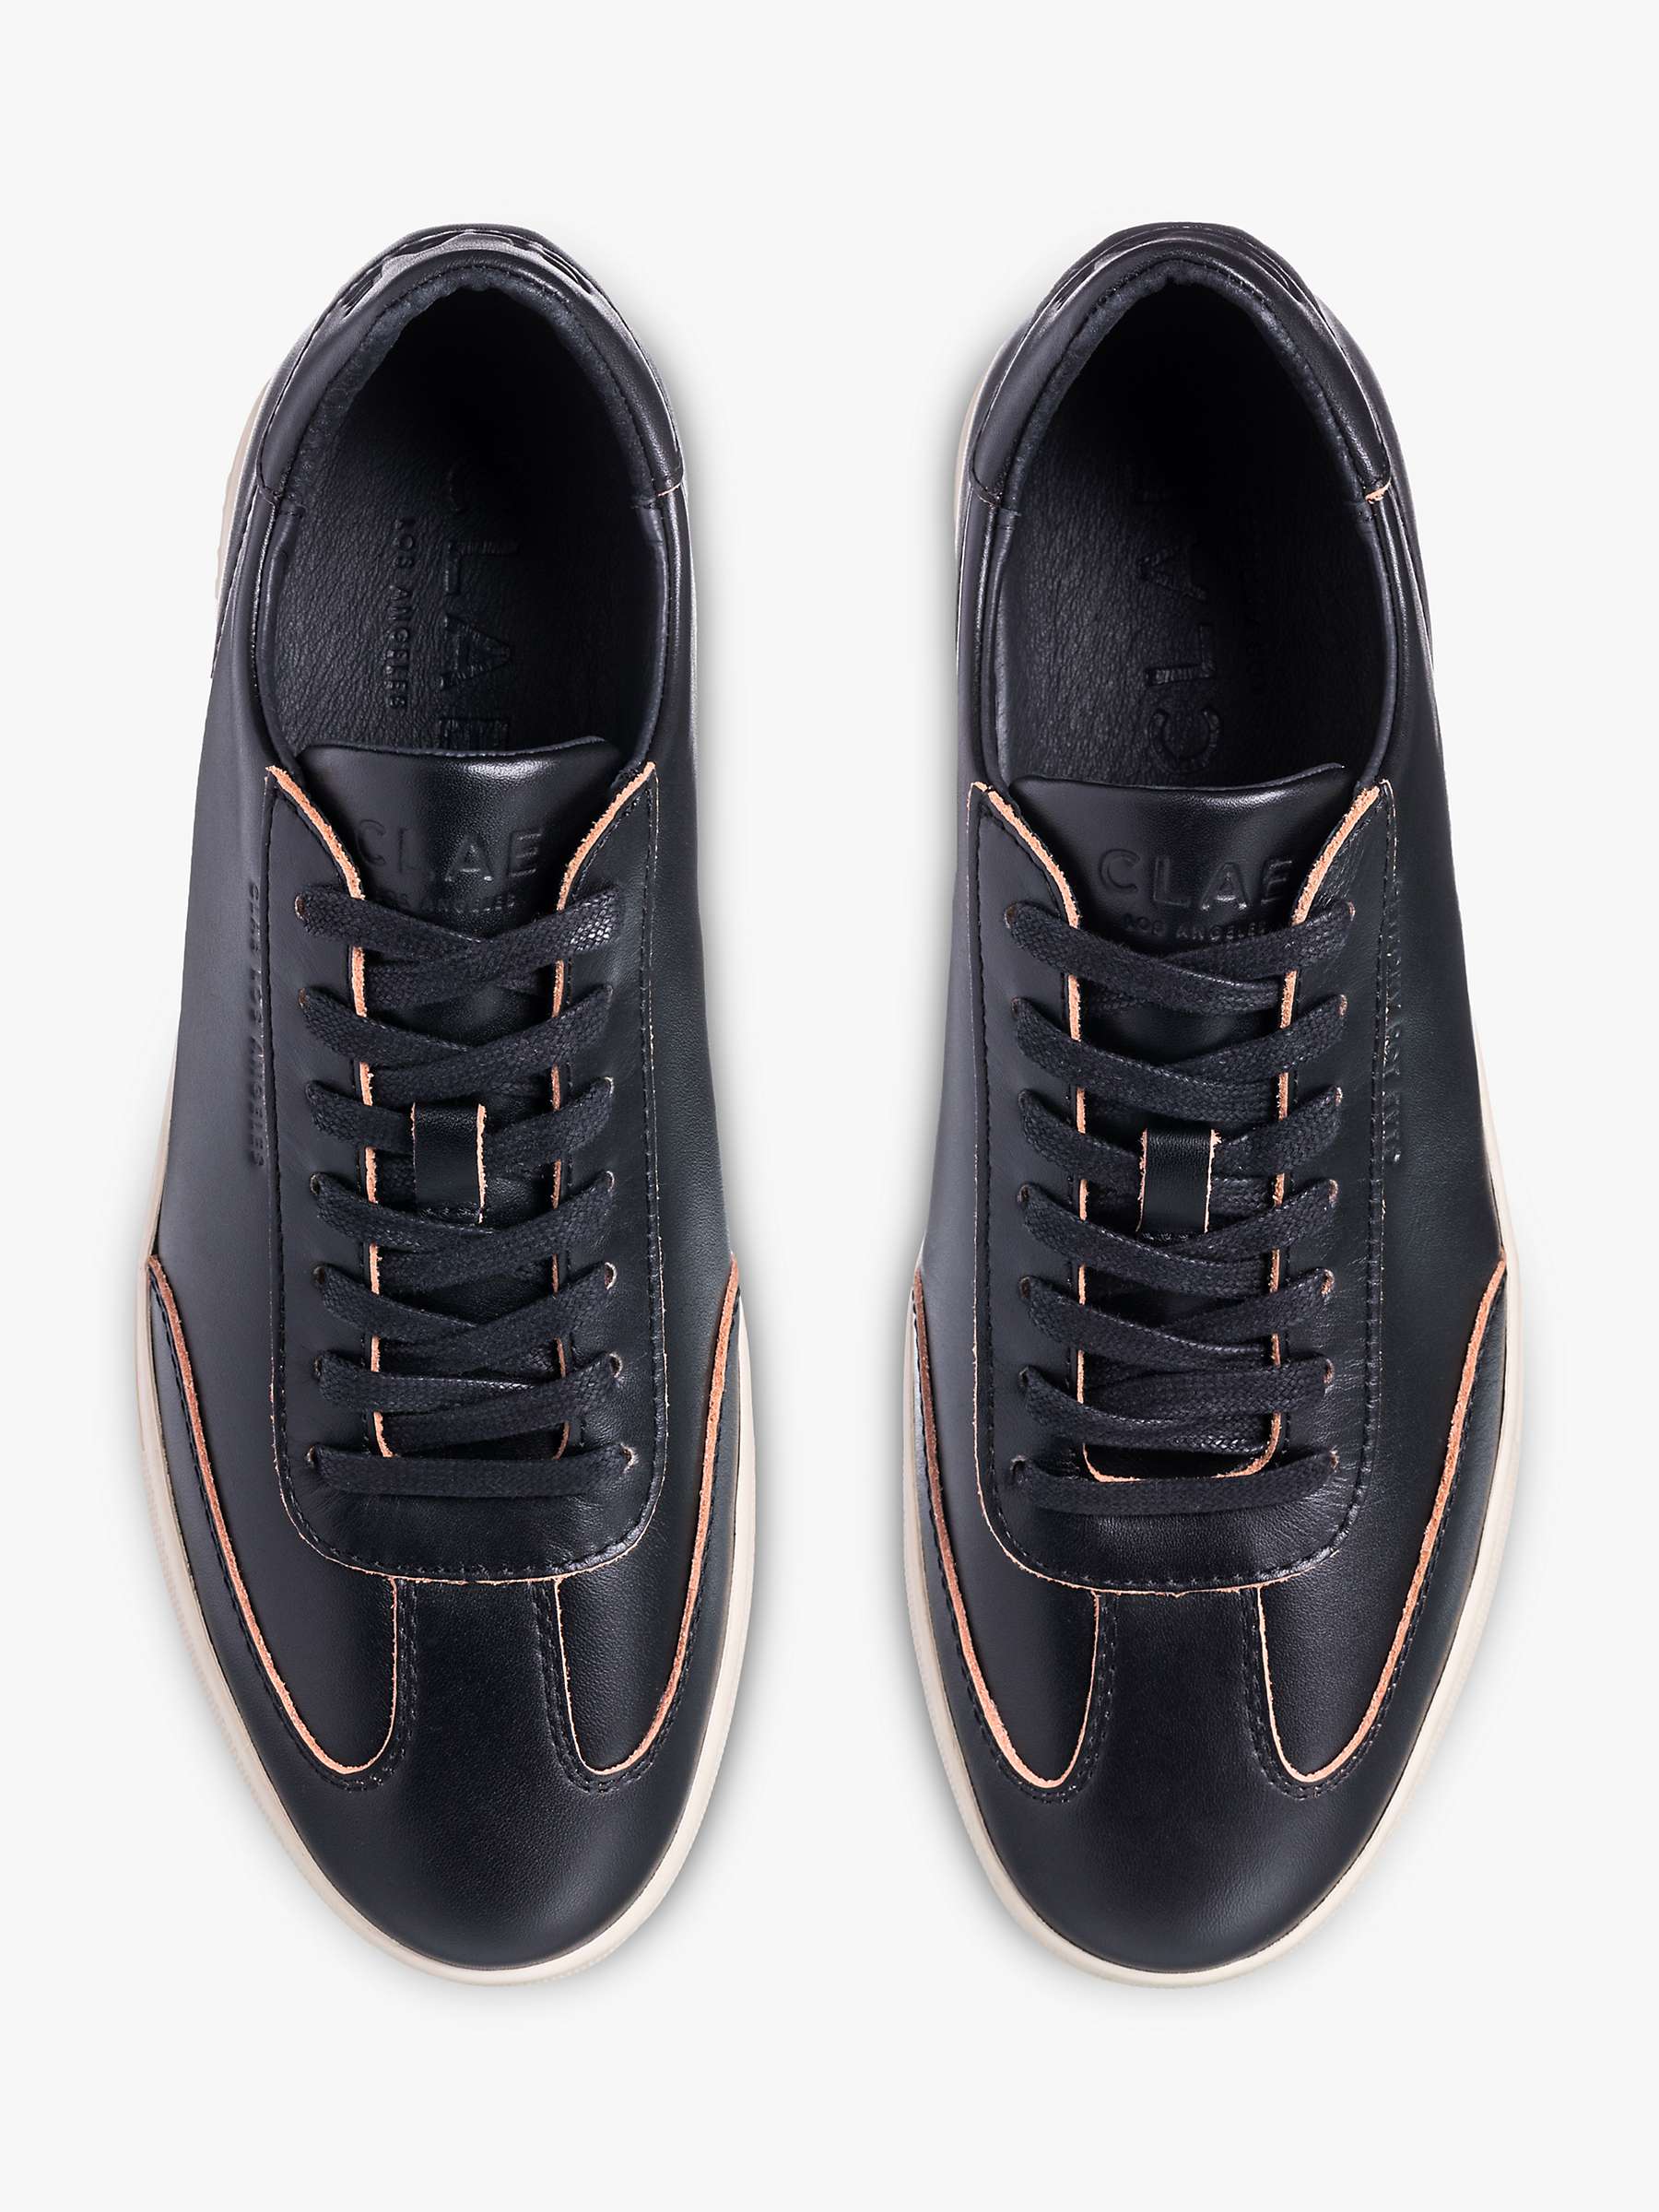 Buy CLAE Deane Raw Edge Leather Trainers, Black Online at johnlewis.com